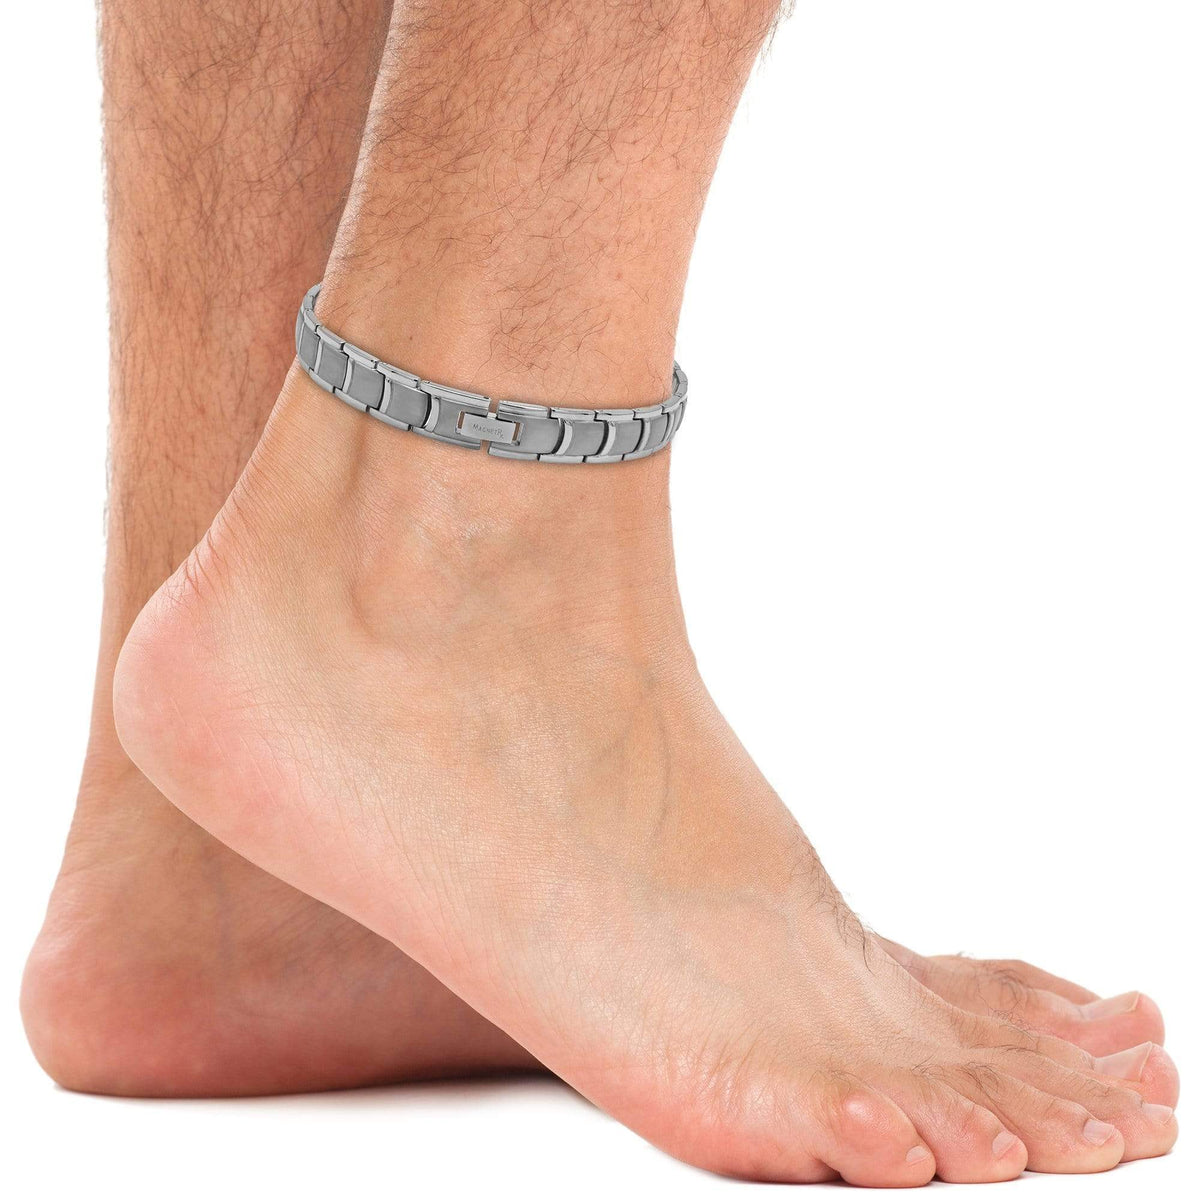 Buy Copper Ankle Bracelet for Women Men, Magnetic Therapy Anklet for  Arthritis Pain Relief, 11inches Adjustable Online at Low Prices in India -  Amazon.in